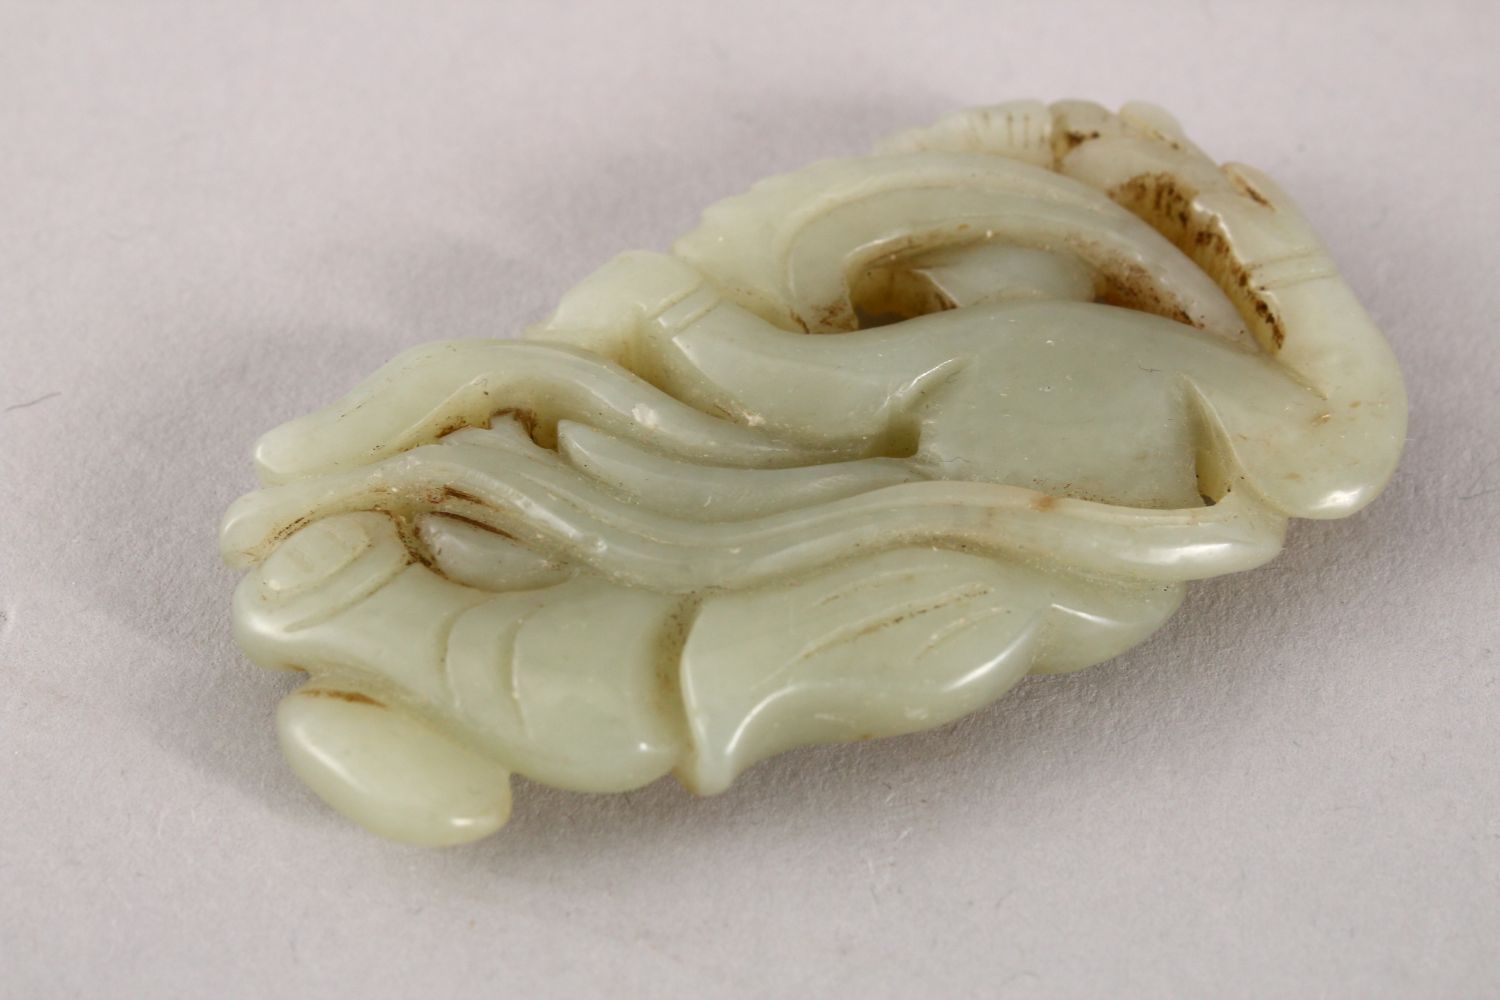 A GOOD 19TH / 20TH CENTURY CHINESE CARVED CELADON JADE PENDANT OF A GODDESS, the goddess recumbent - Image 2 of 2